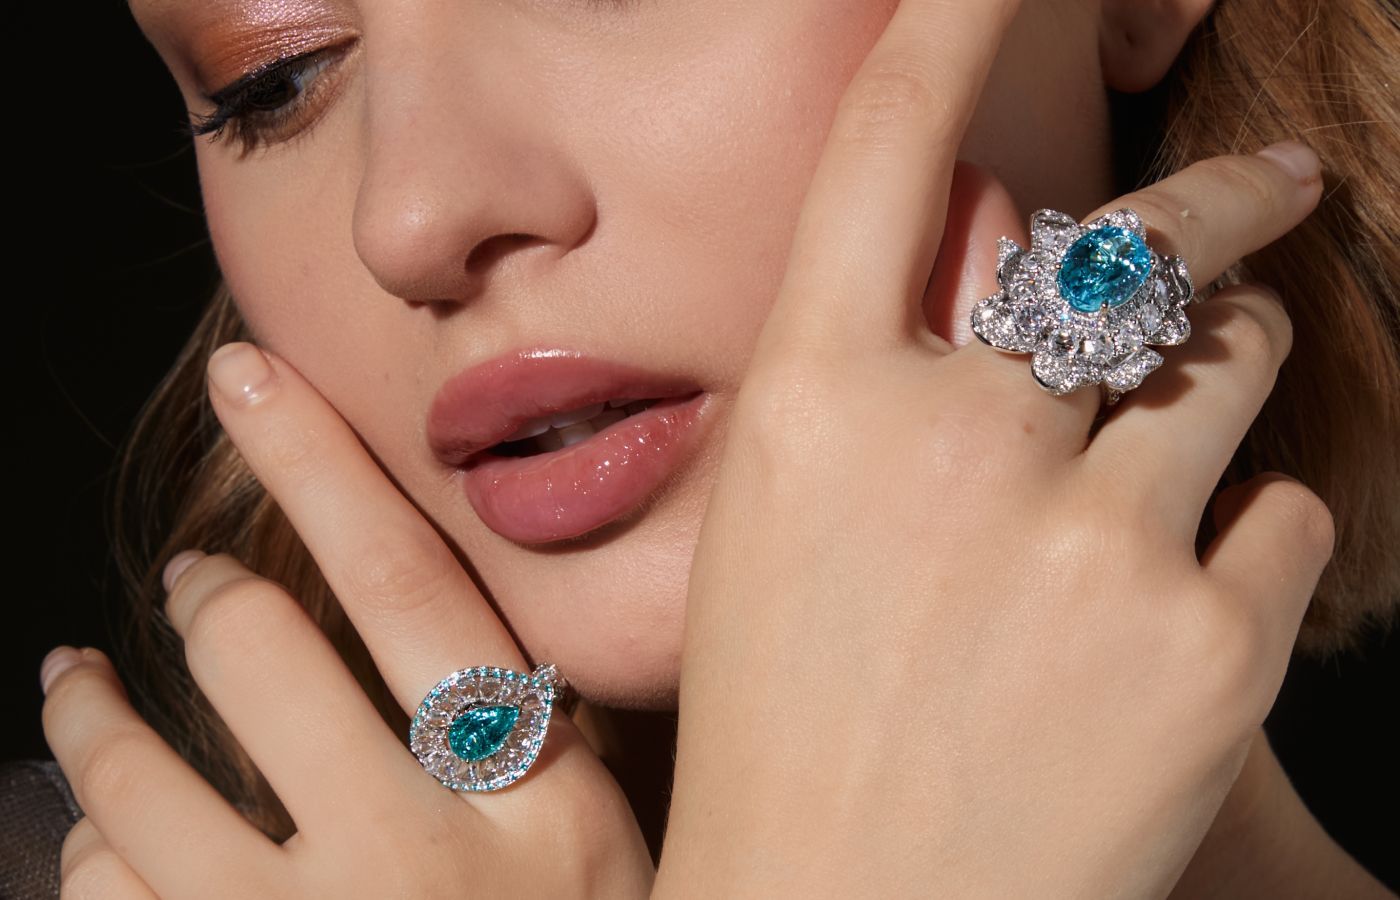 A model wears the Sunita Nahata Ocean Eyes ring with Brazillian Paraiba tourmaline and rose-cut diamonds, and the Nilofar ring with Mozambique Paraiba-type tourmalines with rose-cut diamonds